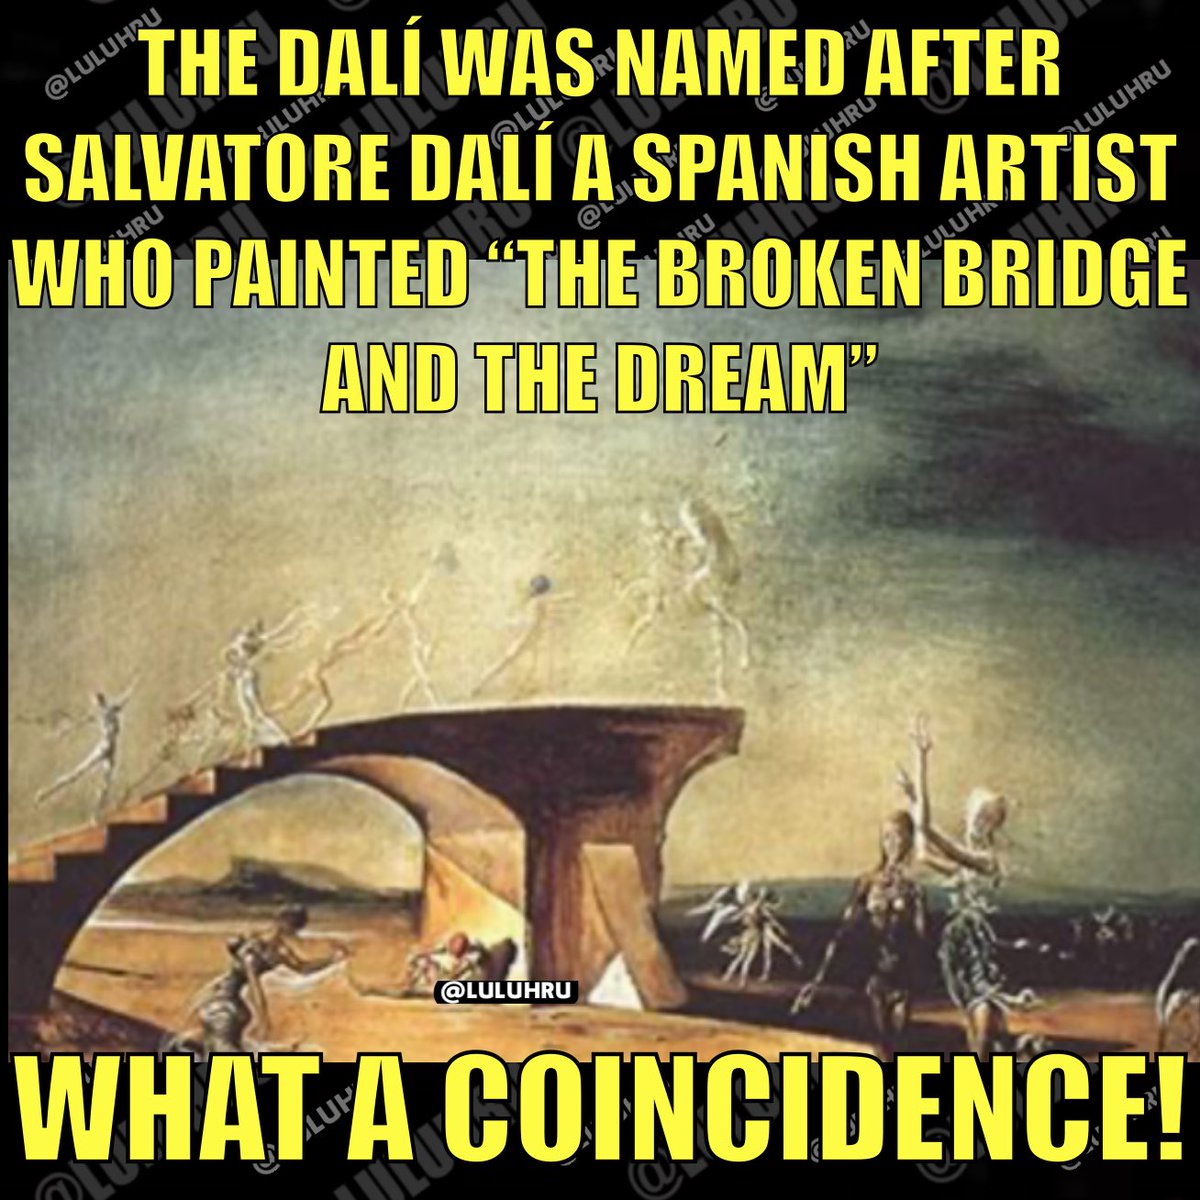 The boat that hit the Baltimore bridge was called the Dalí named after Salvatore Dalí, a Spanish artist his painting is below👇🏻who else doesn’t believe in coincidences?